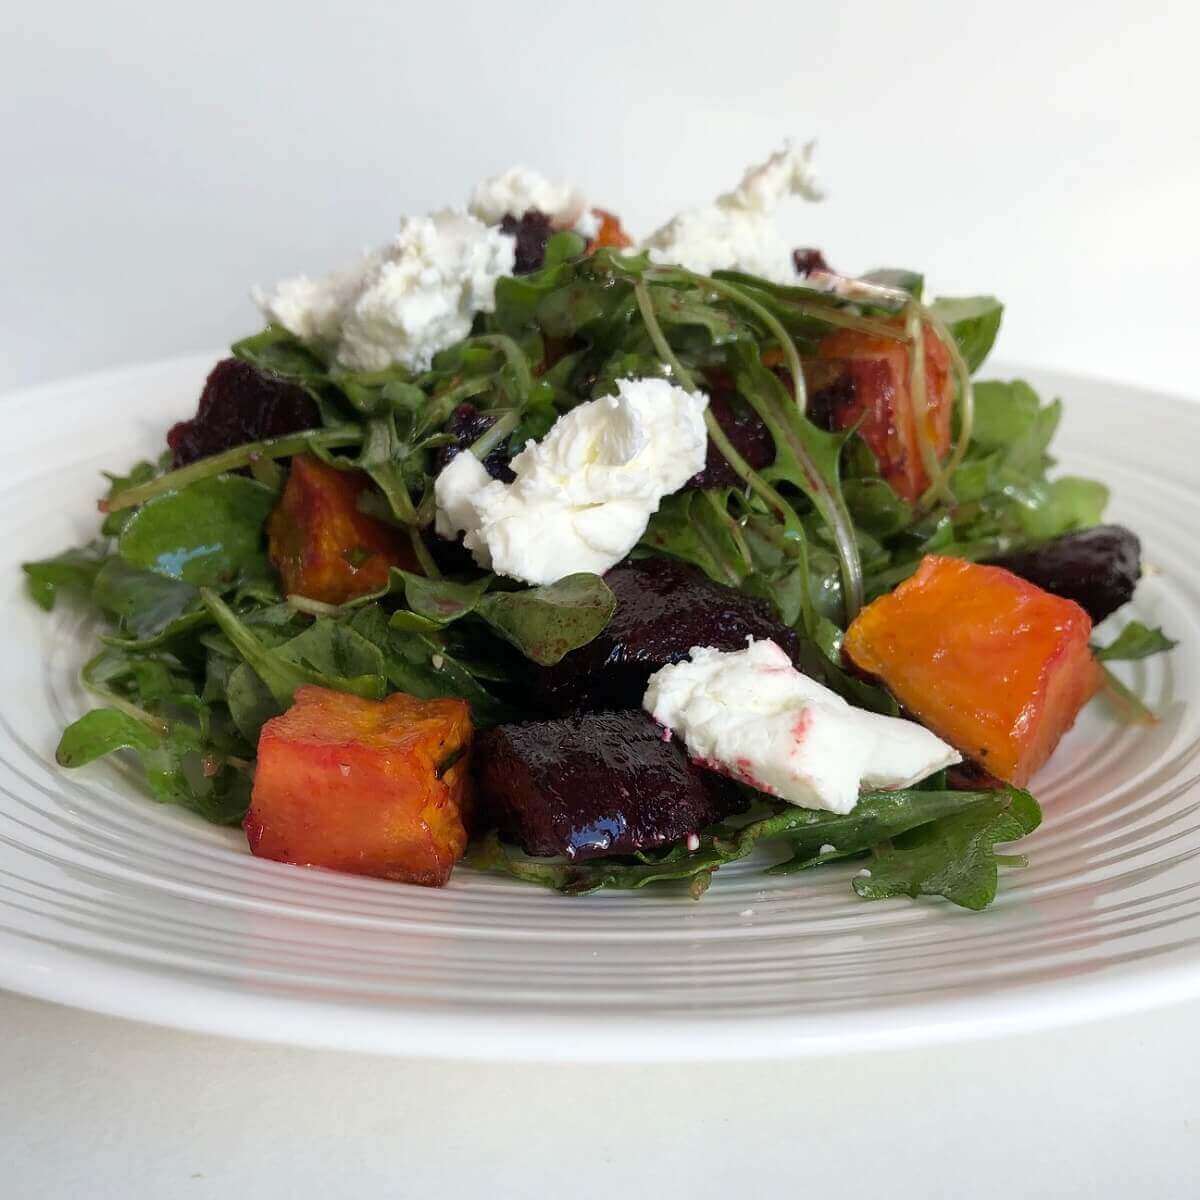 Beetroot and sweet potato salad piled on a white plate.